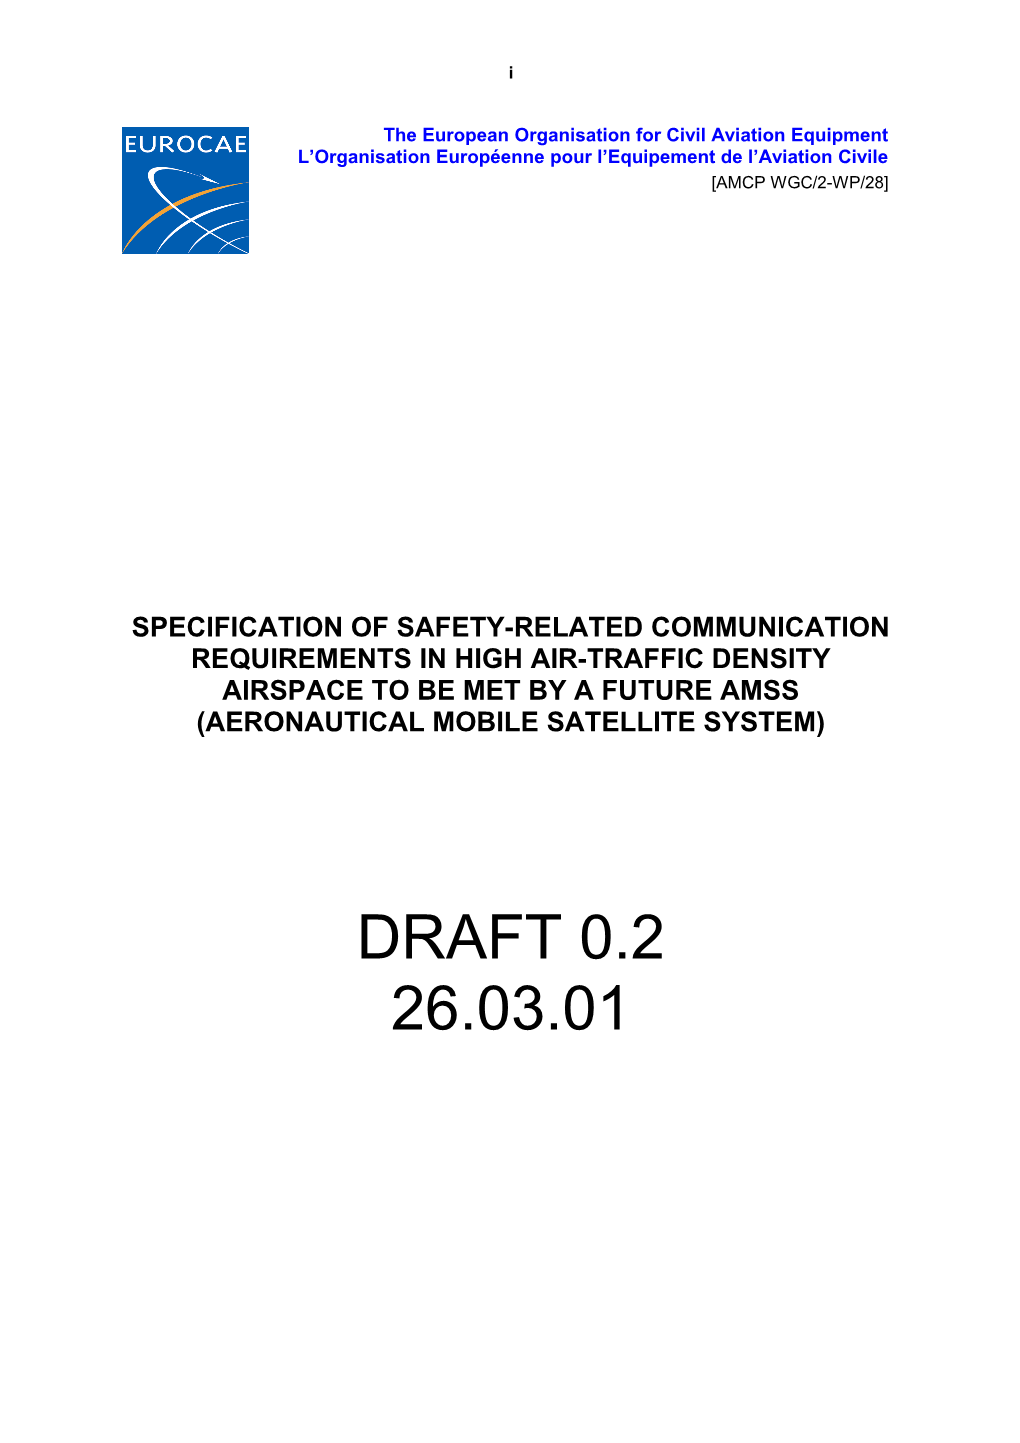 EUROCAE Specifications of Safety Related Communication Requirements in High Air-Traffic